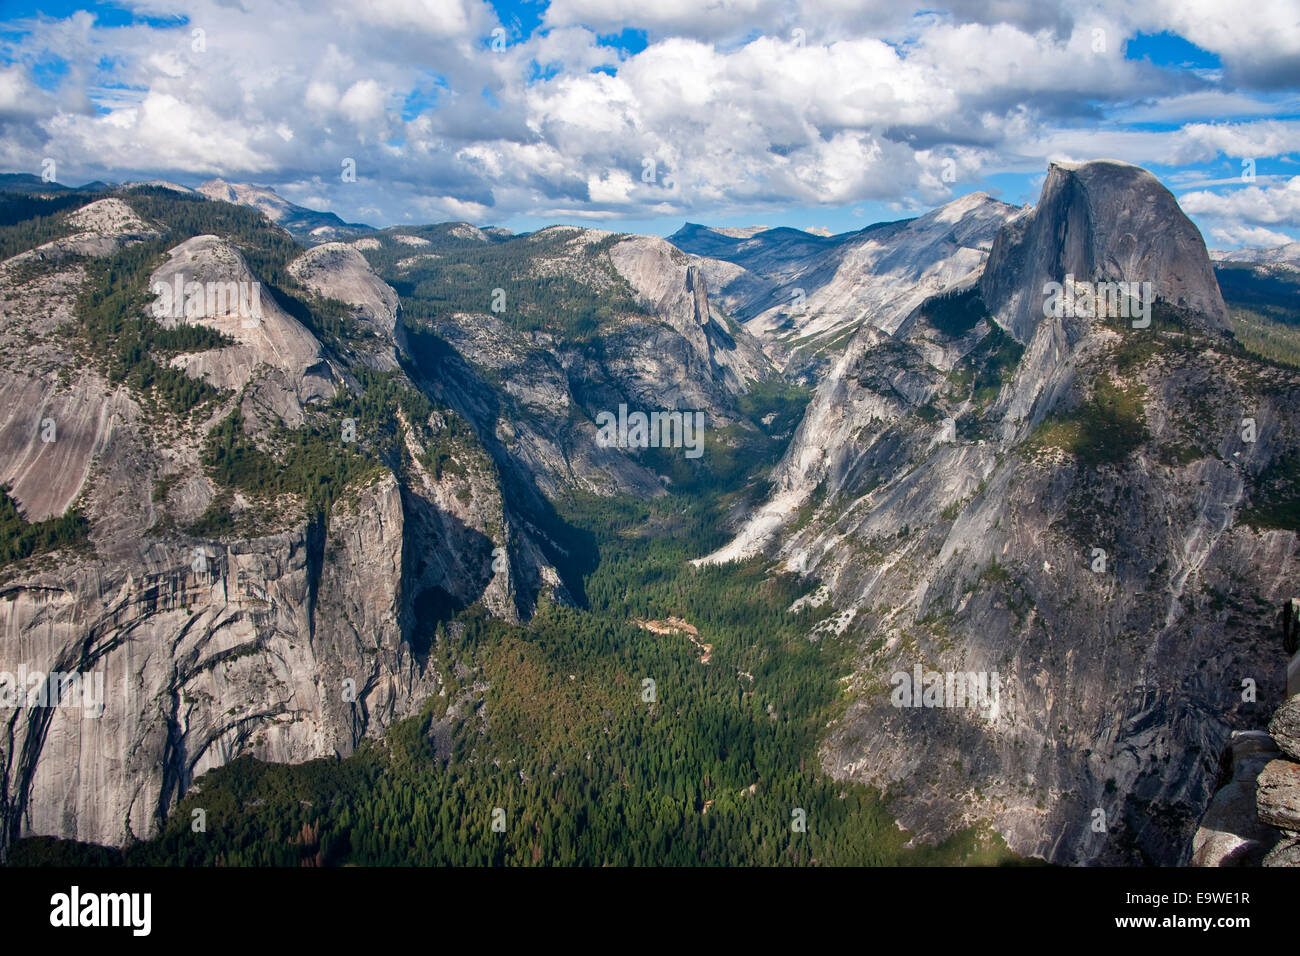 Yosemite National Park from Glacier Point overlook with Half Dome at right. Stock Photo